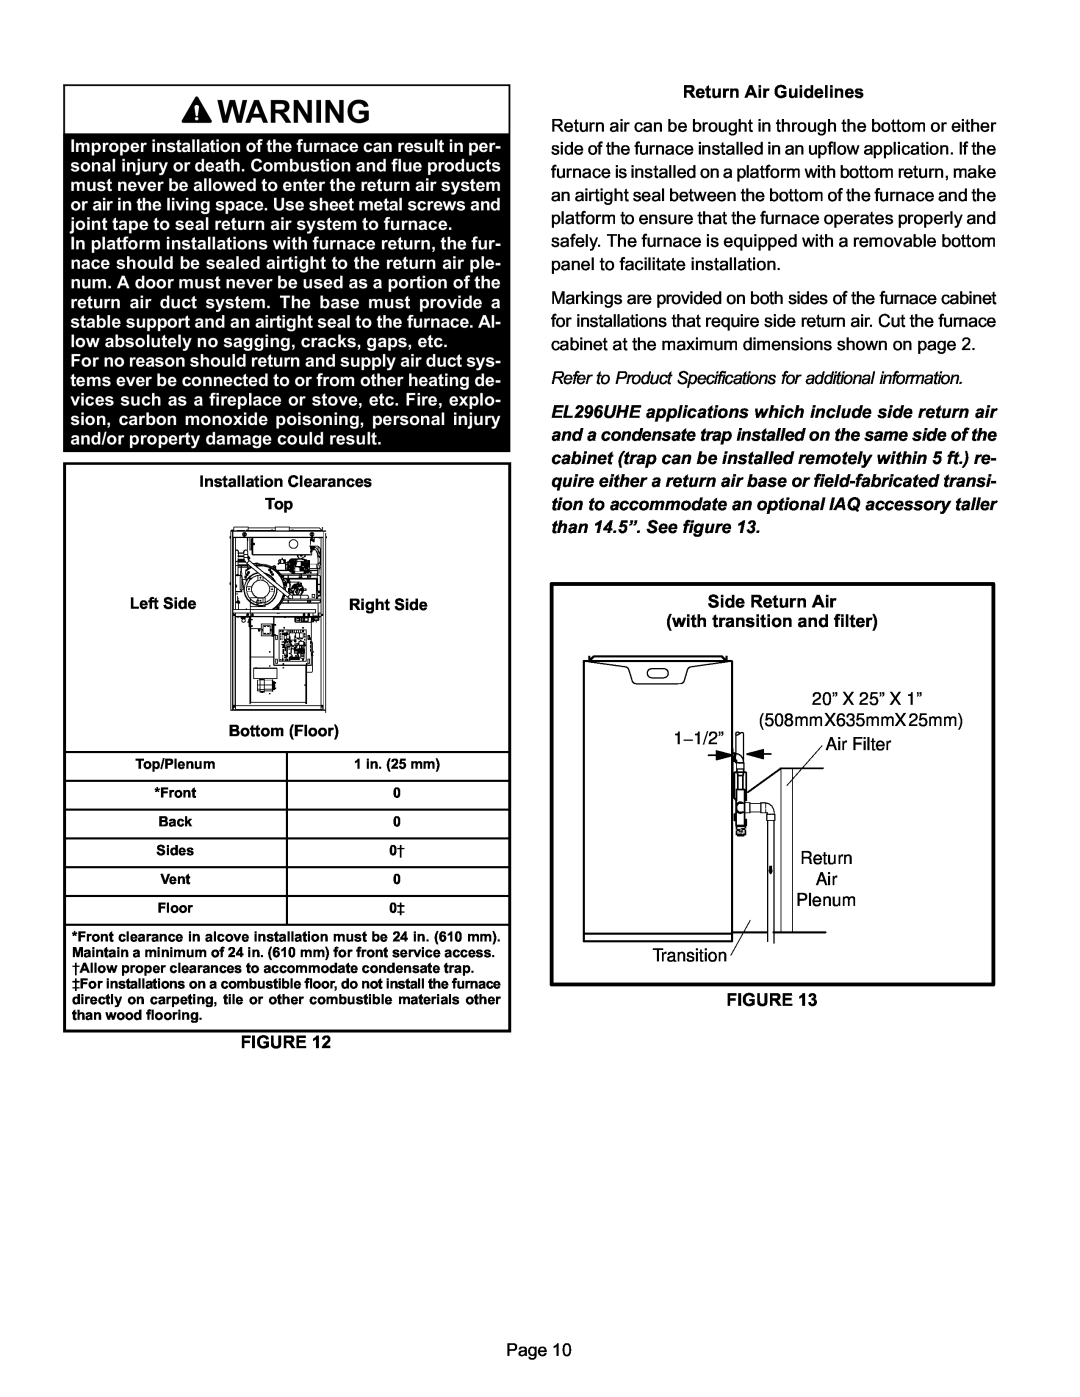 Lennox International Inc EL296UHE Return Air Guidelines, Side Return Air with transition and filter 